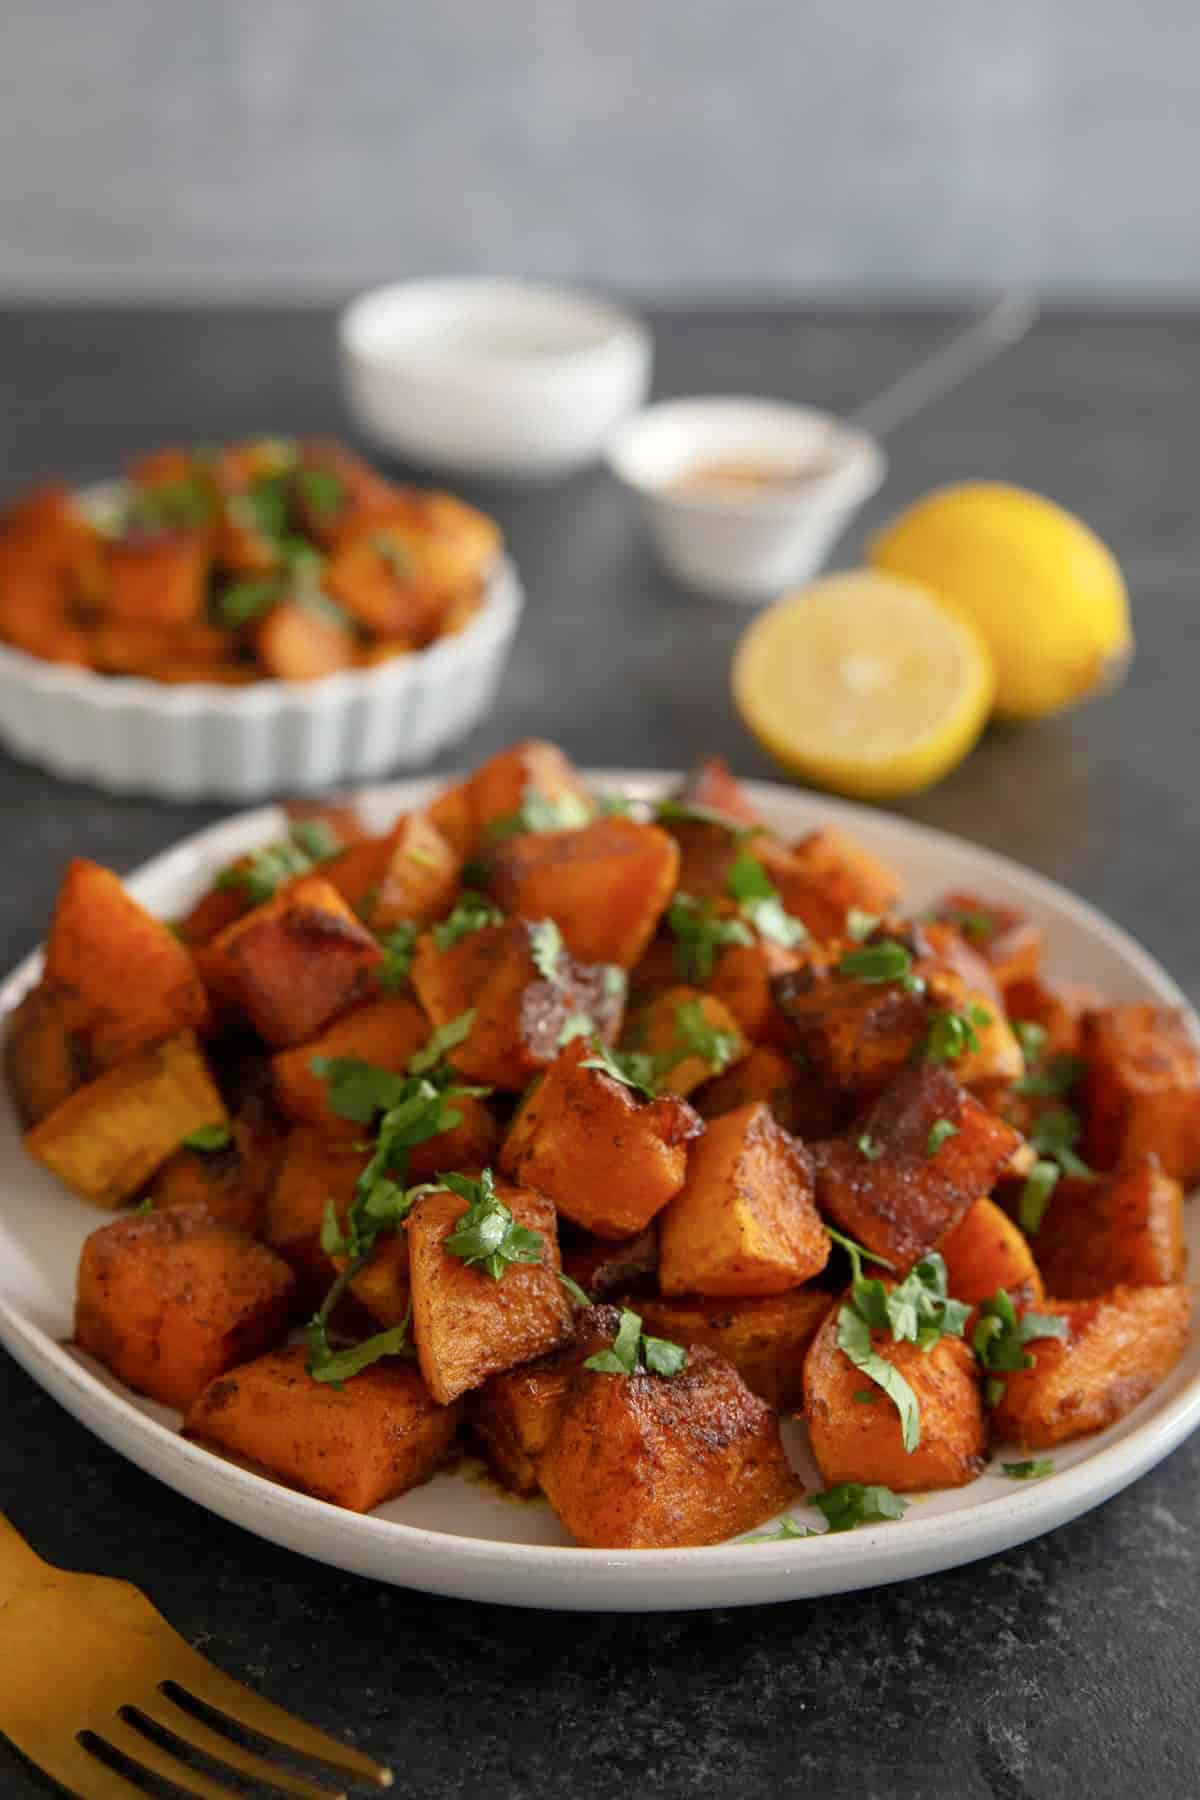 Roasted butternut squash makes an elegant side dish for any occasion. Butternut squash cubes are tossed with olive oil and warm spices and roasted until caramelized, then topped with honey, lemon and cilantro.
